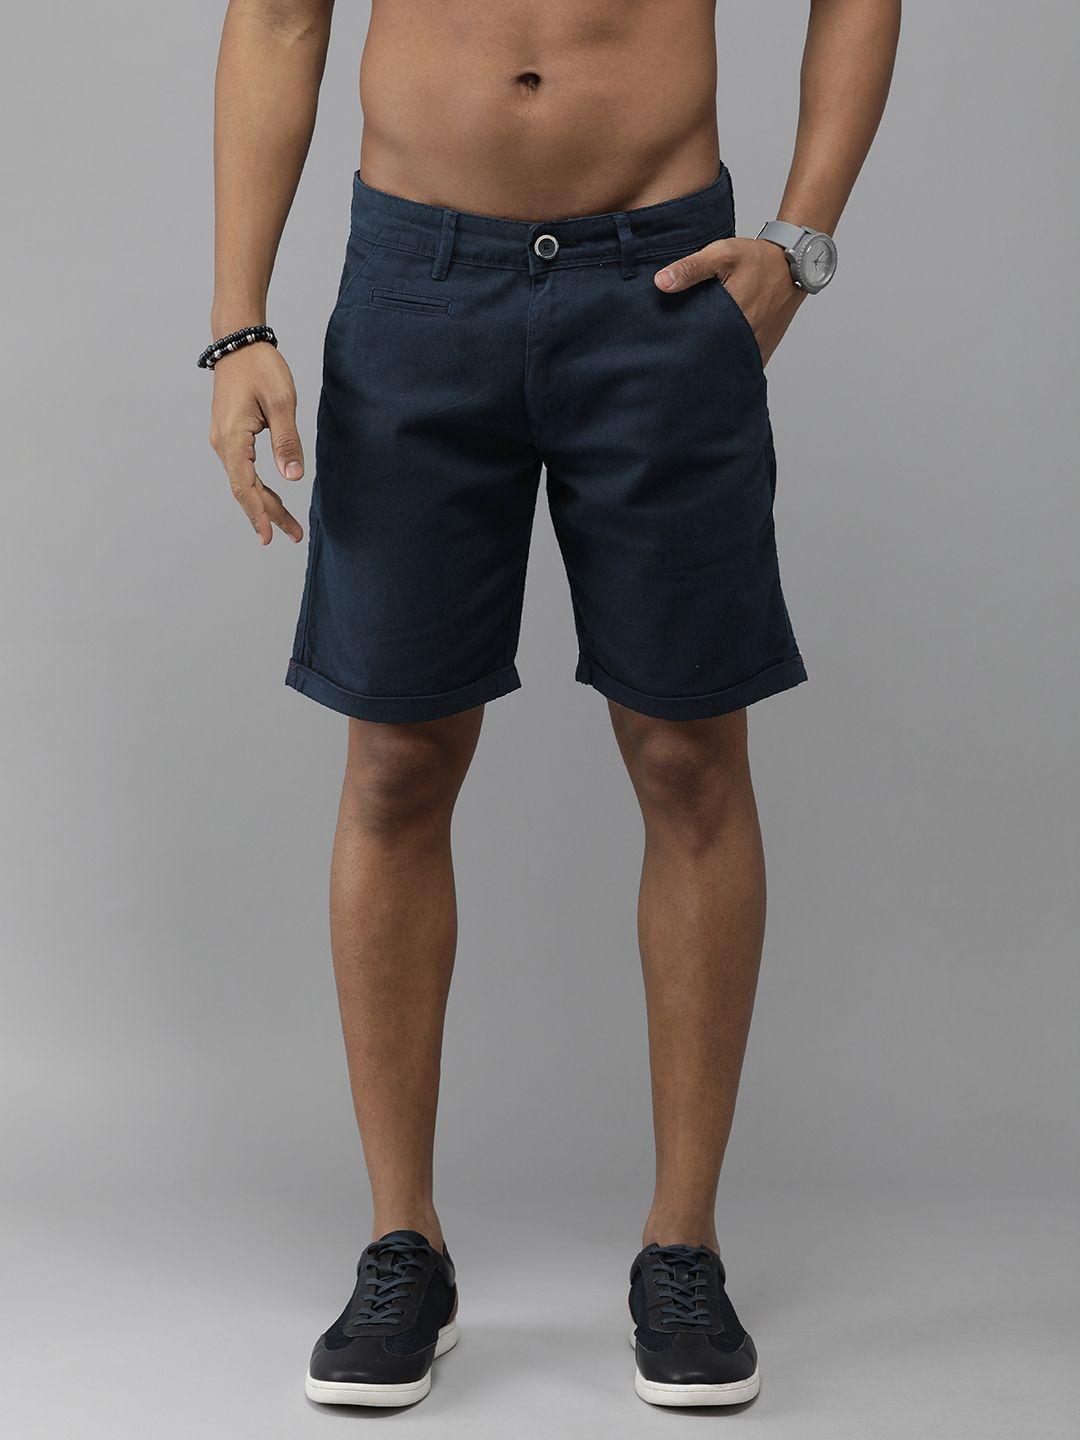 the roadster lifestyle co men navy blue chino shorts